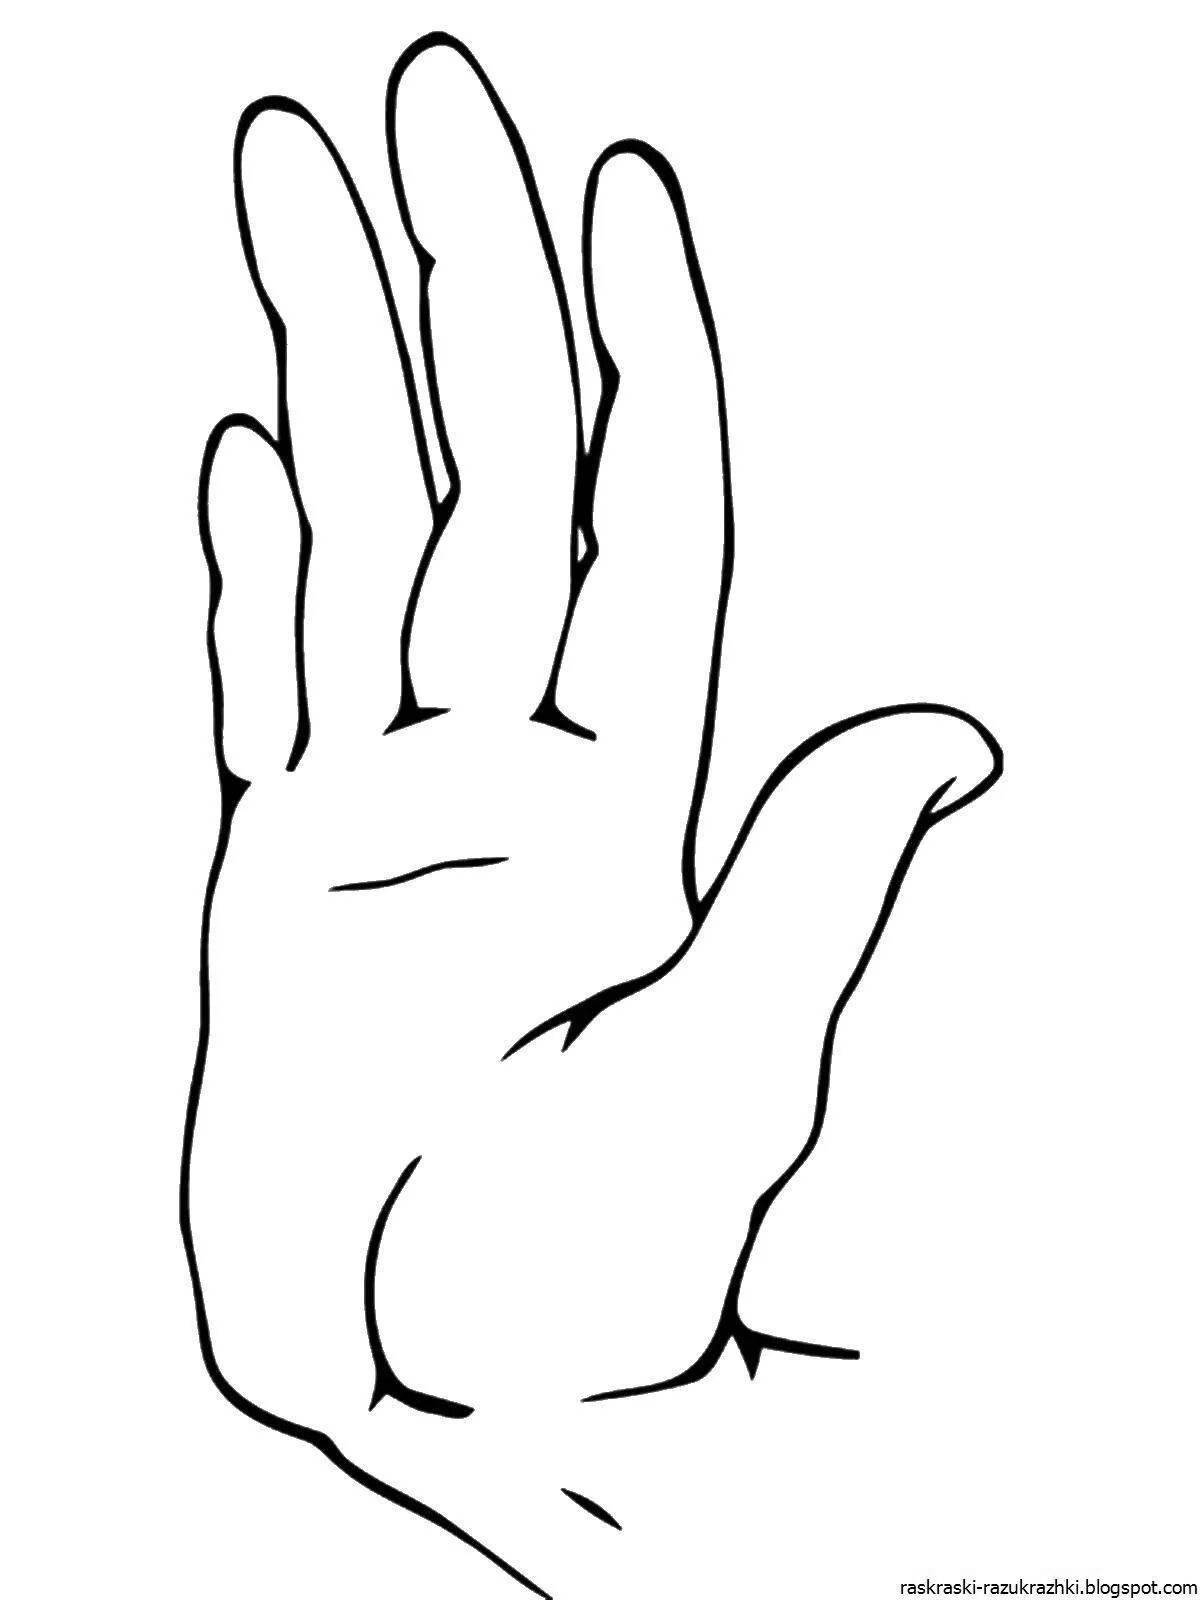 Glowing wrist coloring page